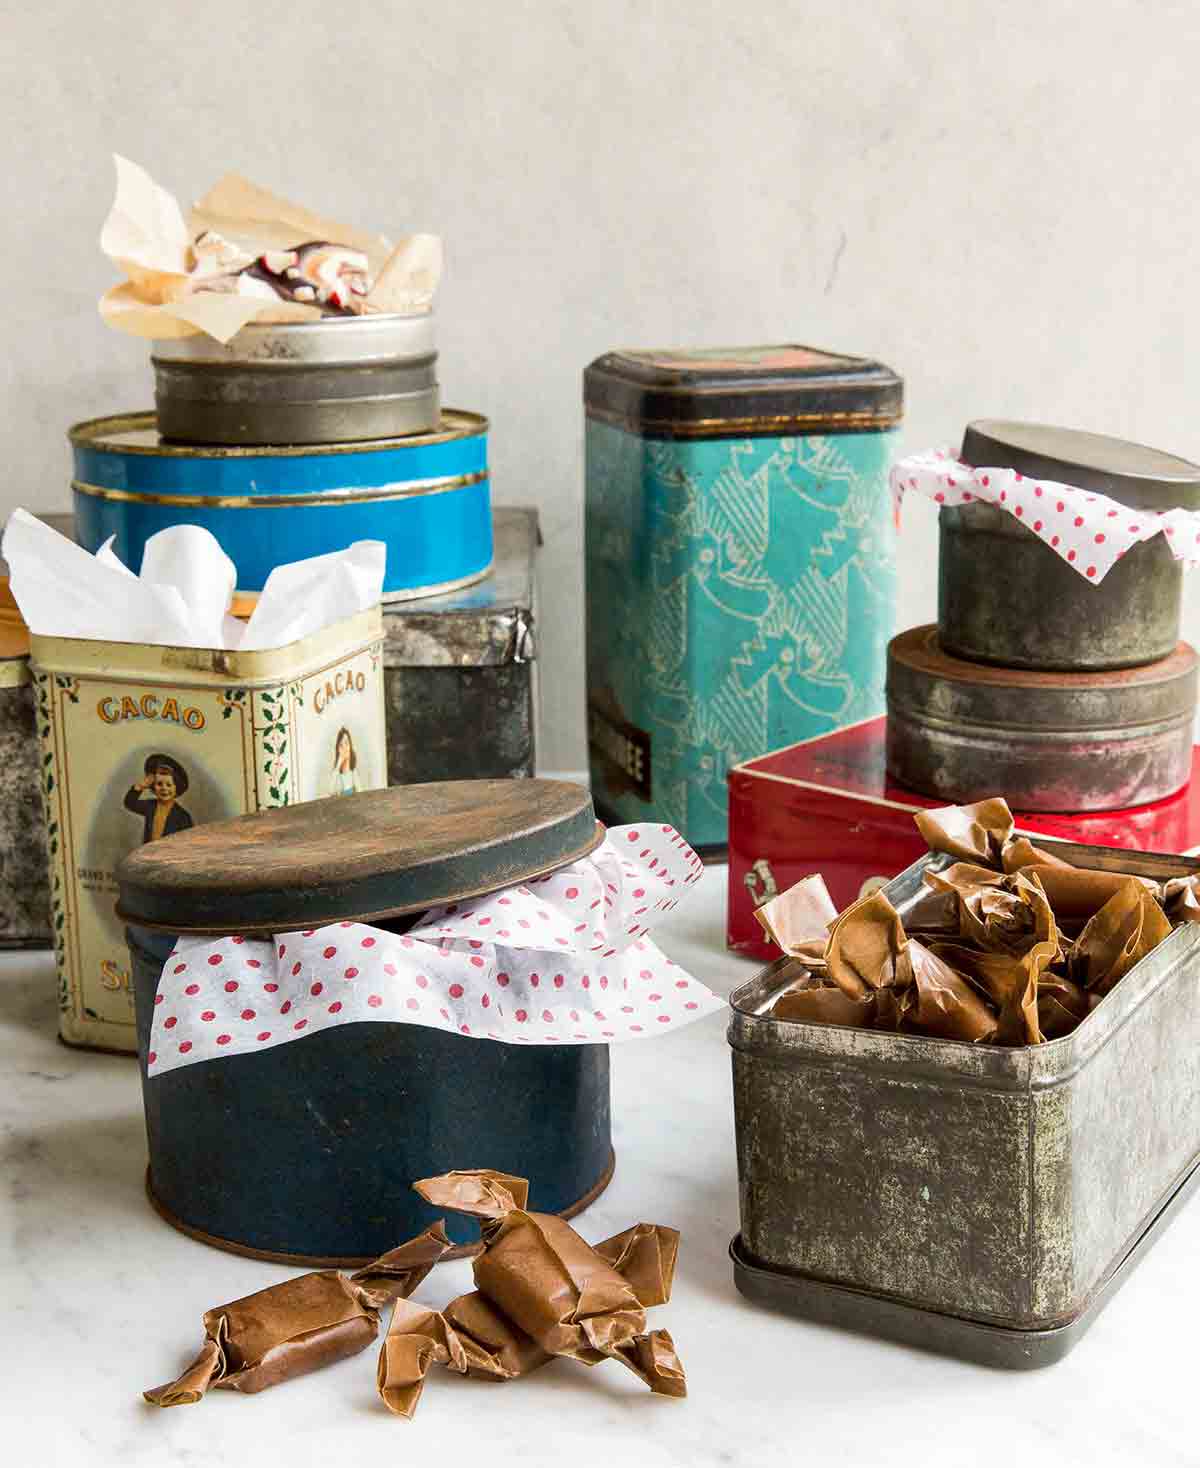 An assortment of holiday cookie tins with tissue paper sticking out of them.